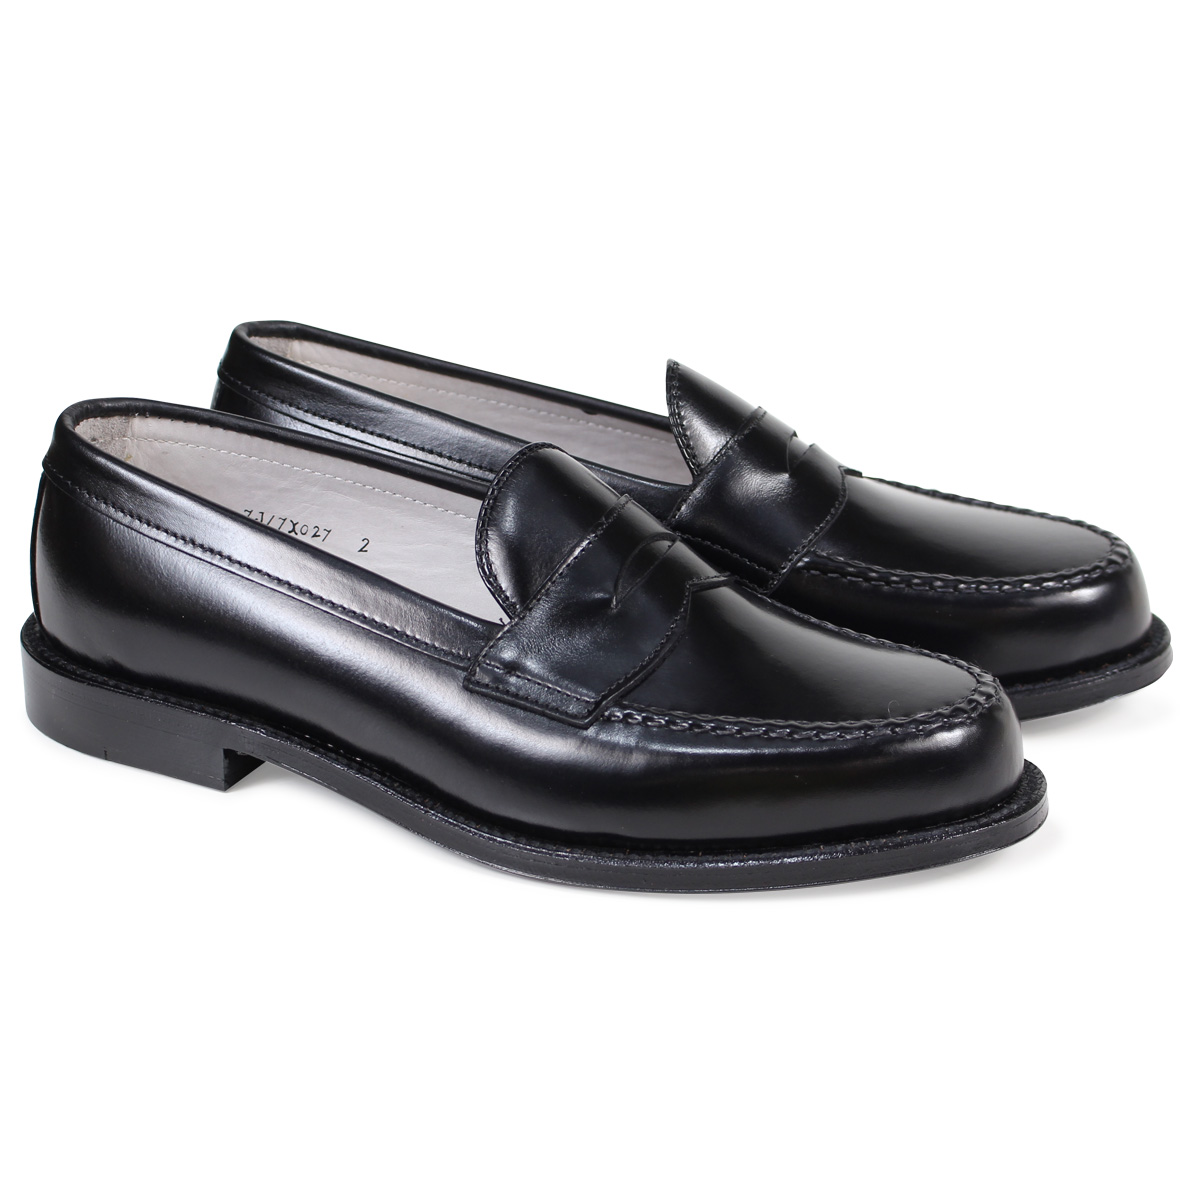 Loafers Shoes alden alden loafers shoes leisure handsewn d wise 981 mens RQIGNJA